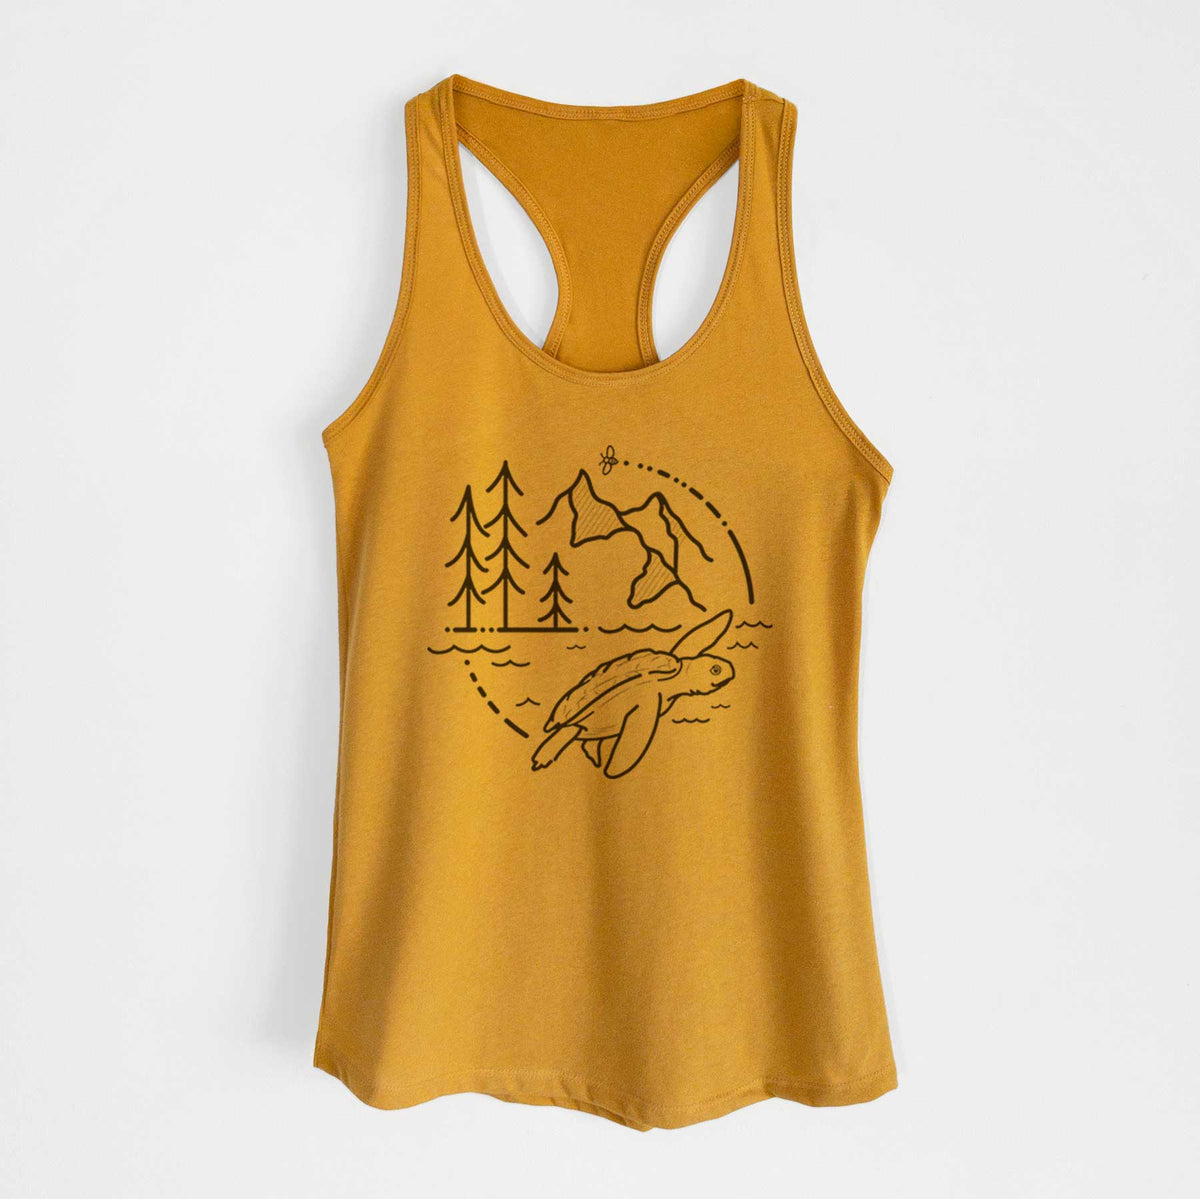 It&#39;s All Connected - Kemps Ridley Turtle - Women&#39;s Racerback Tanktop